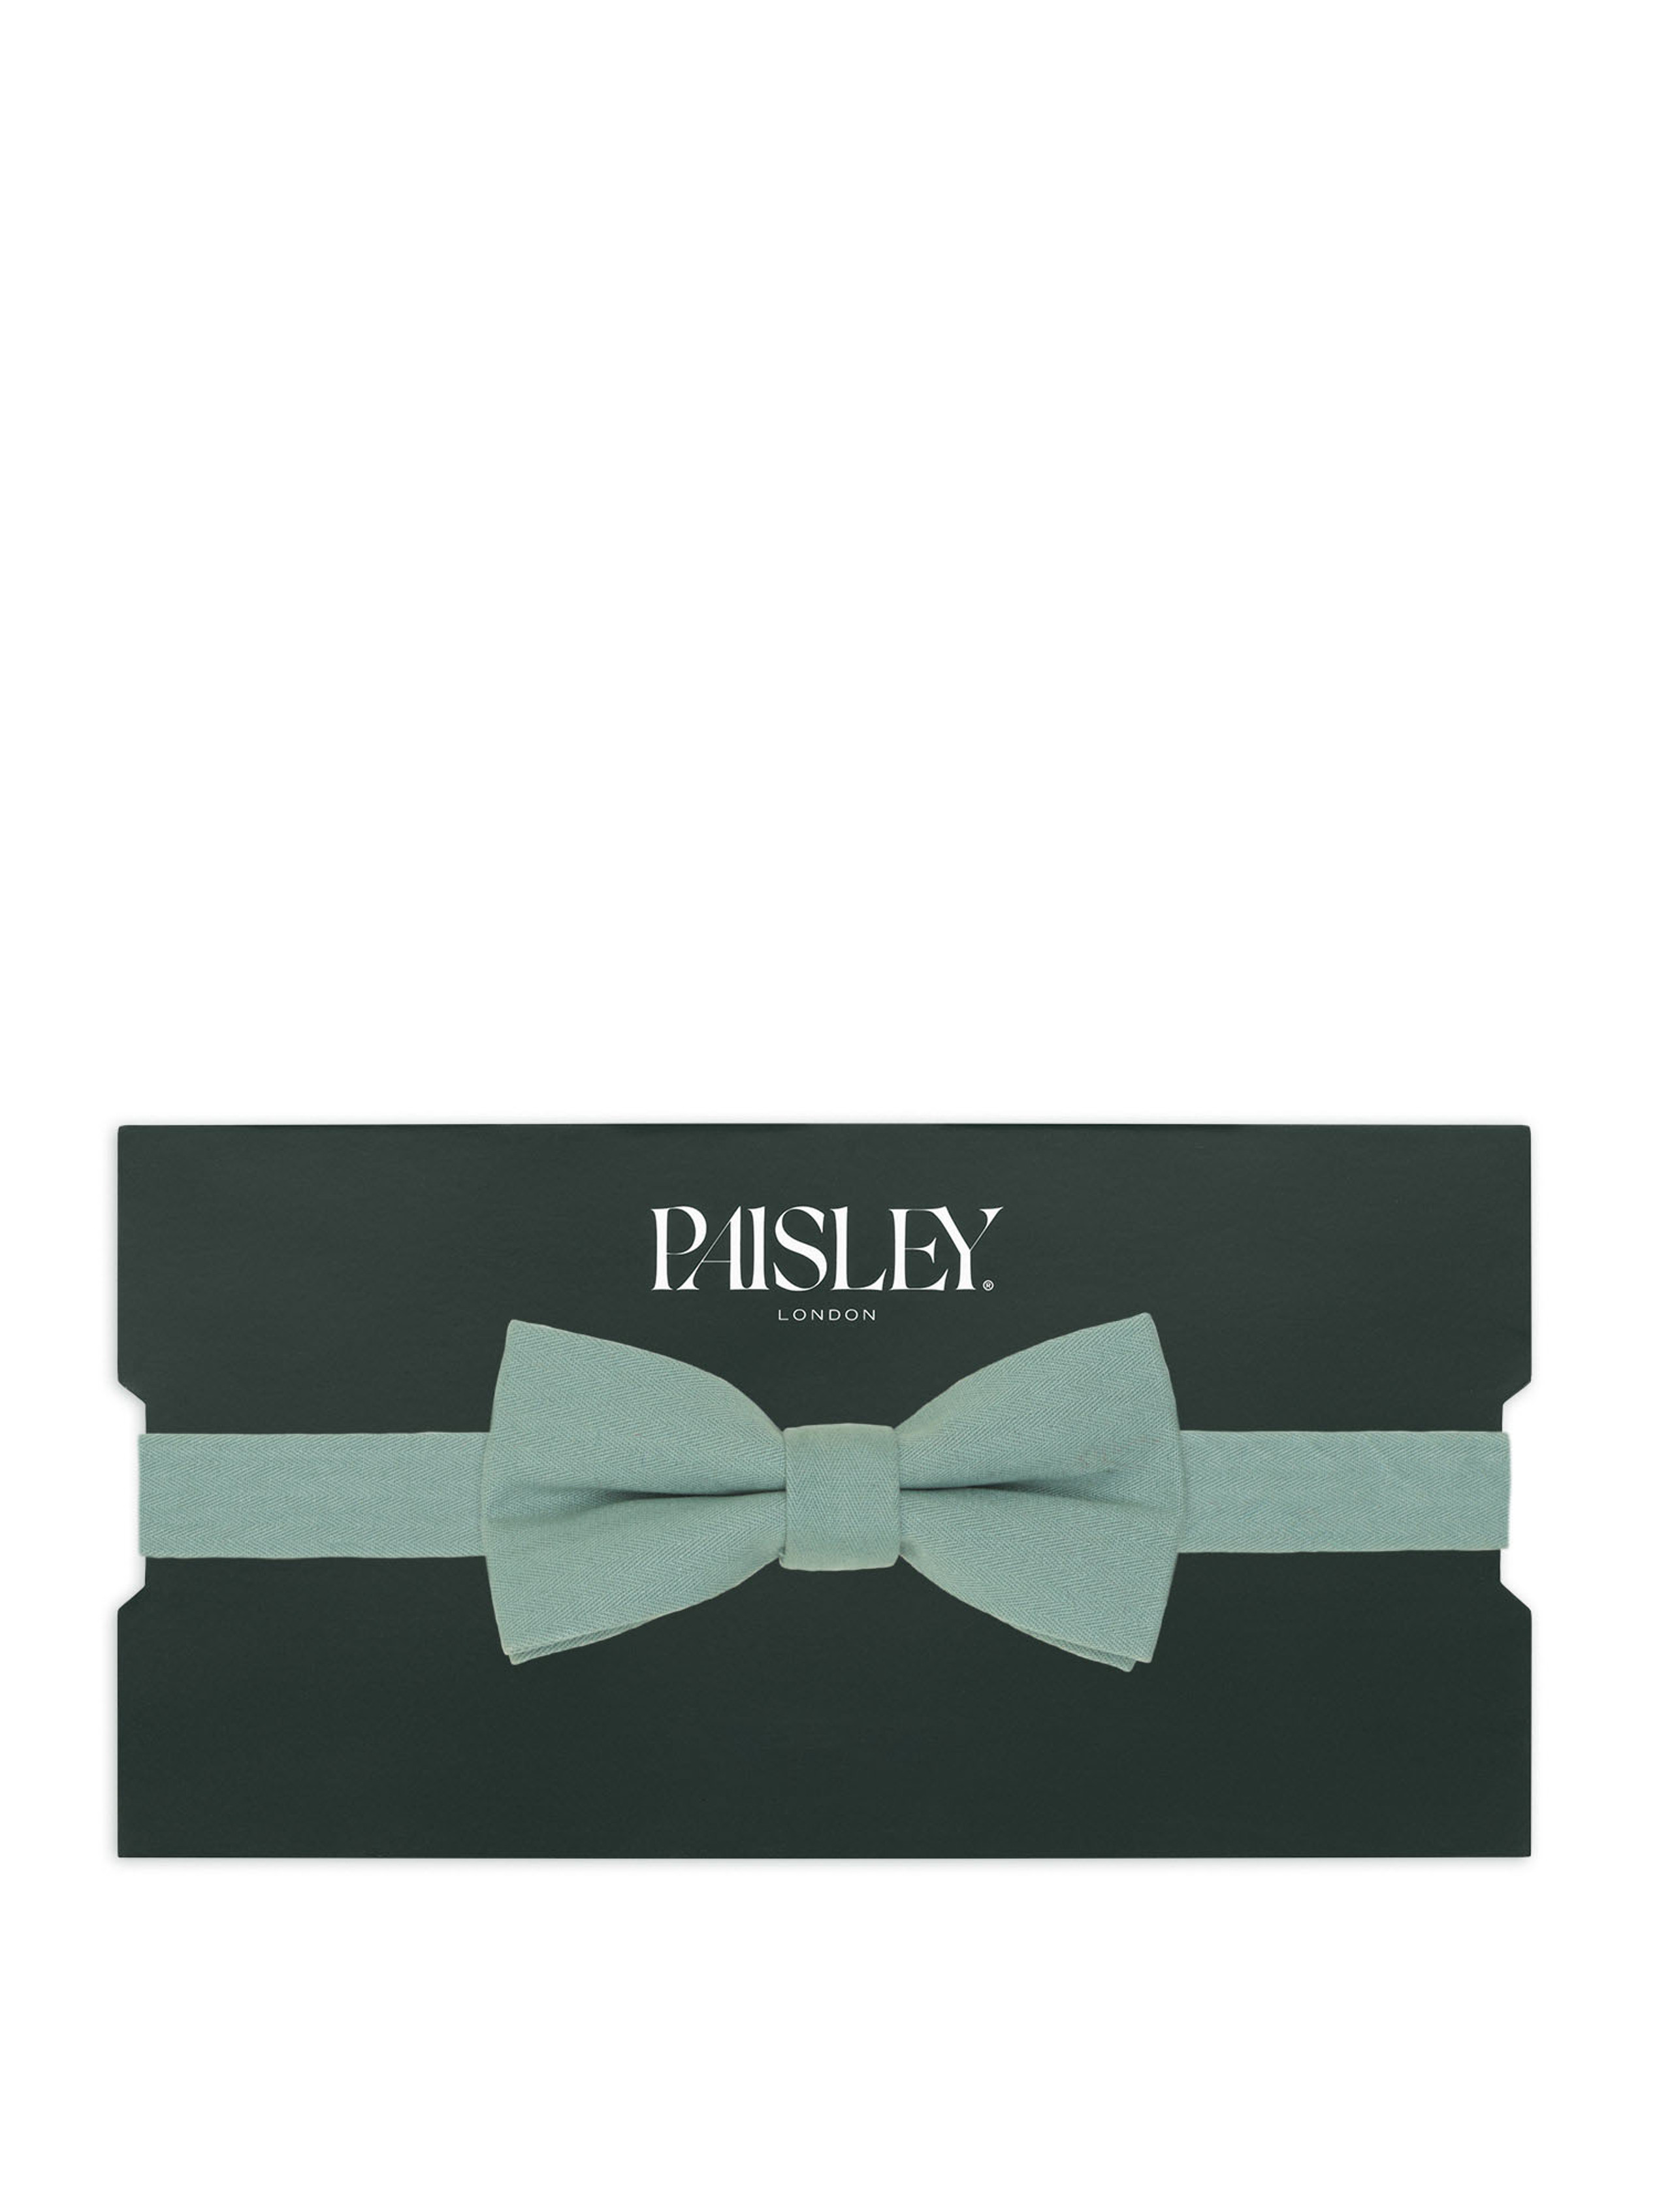 Paisley of London | Sage green dickie bow | Bow tie | Dickie bow tie